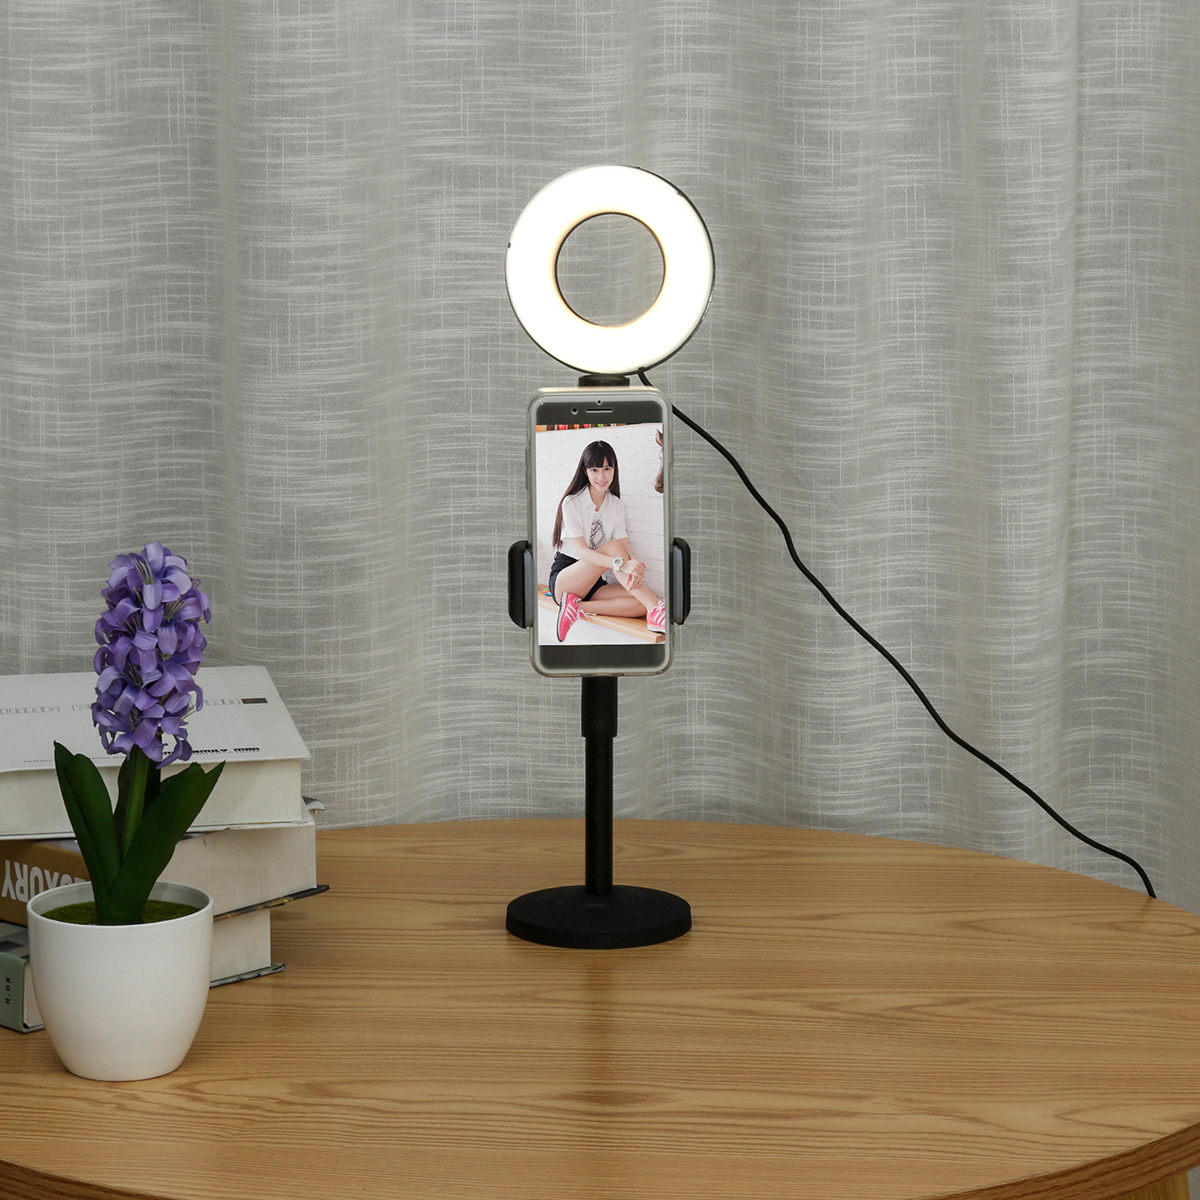 1395quot-Dimmable-LED-Ring-Light-Stand-Photo-Video-Camera-Phone-For-Youtube-Live-1675306-9